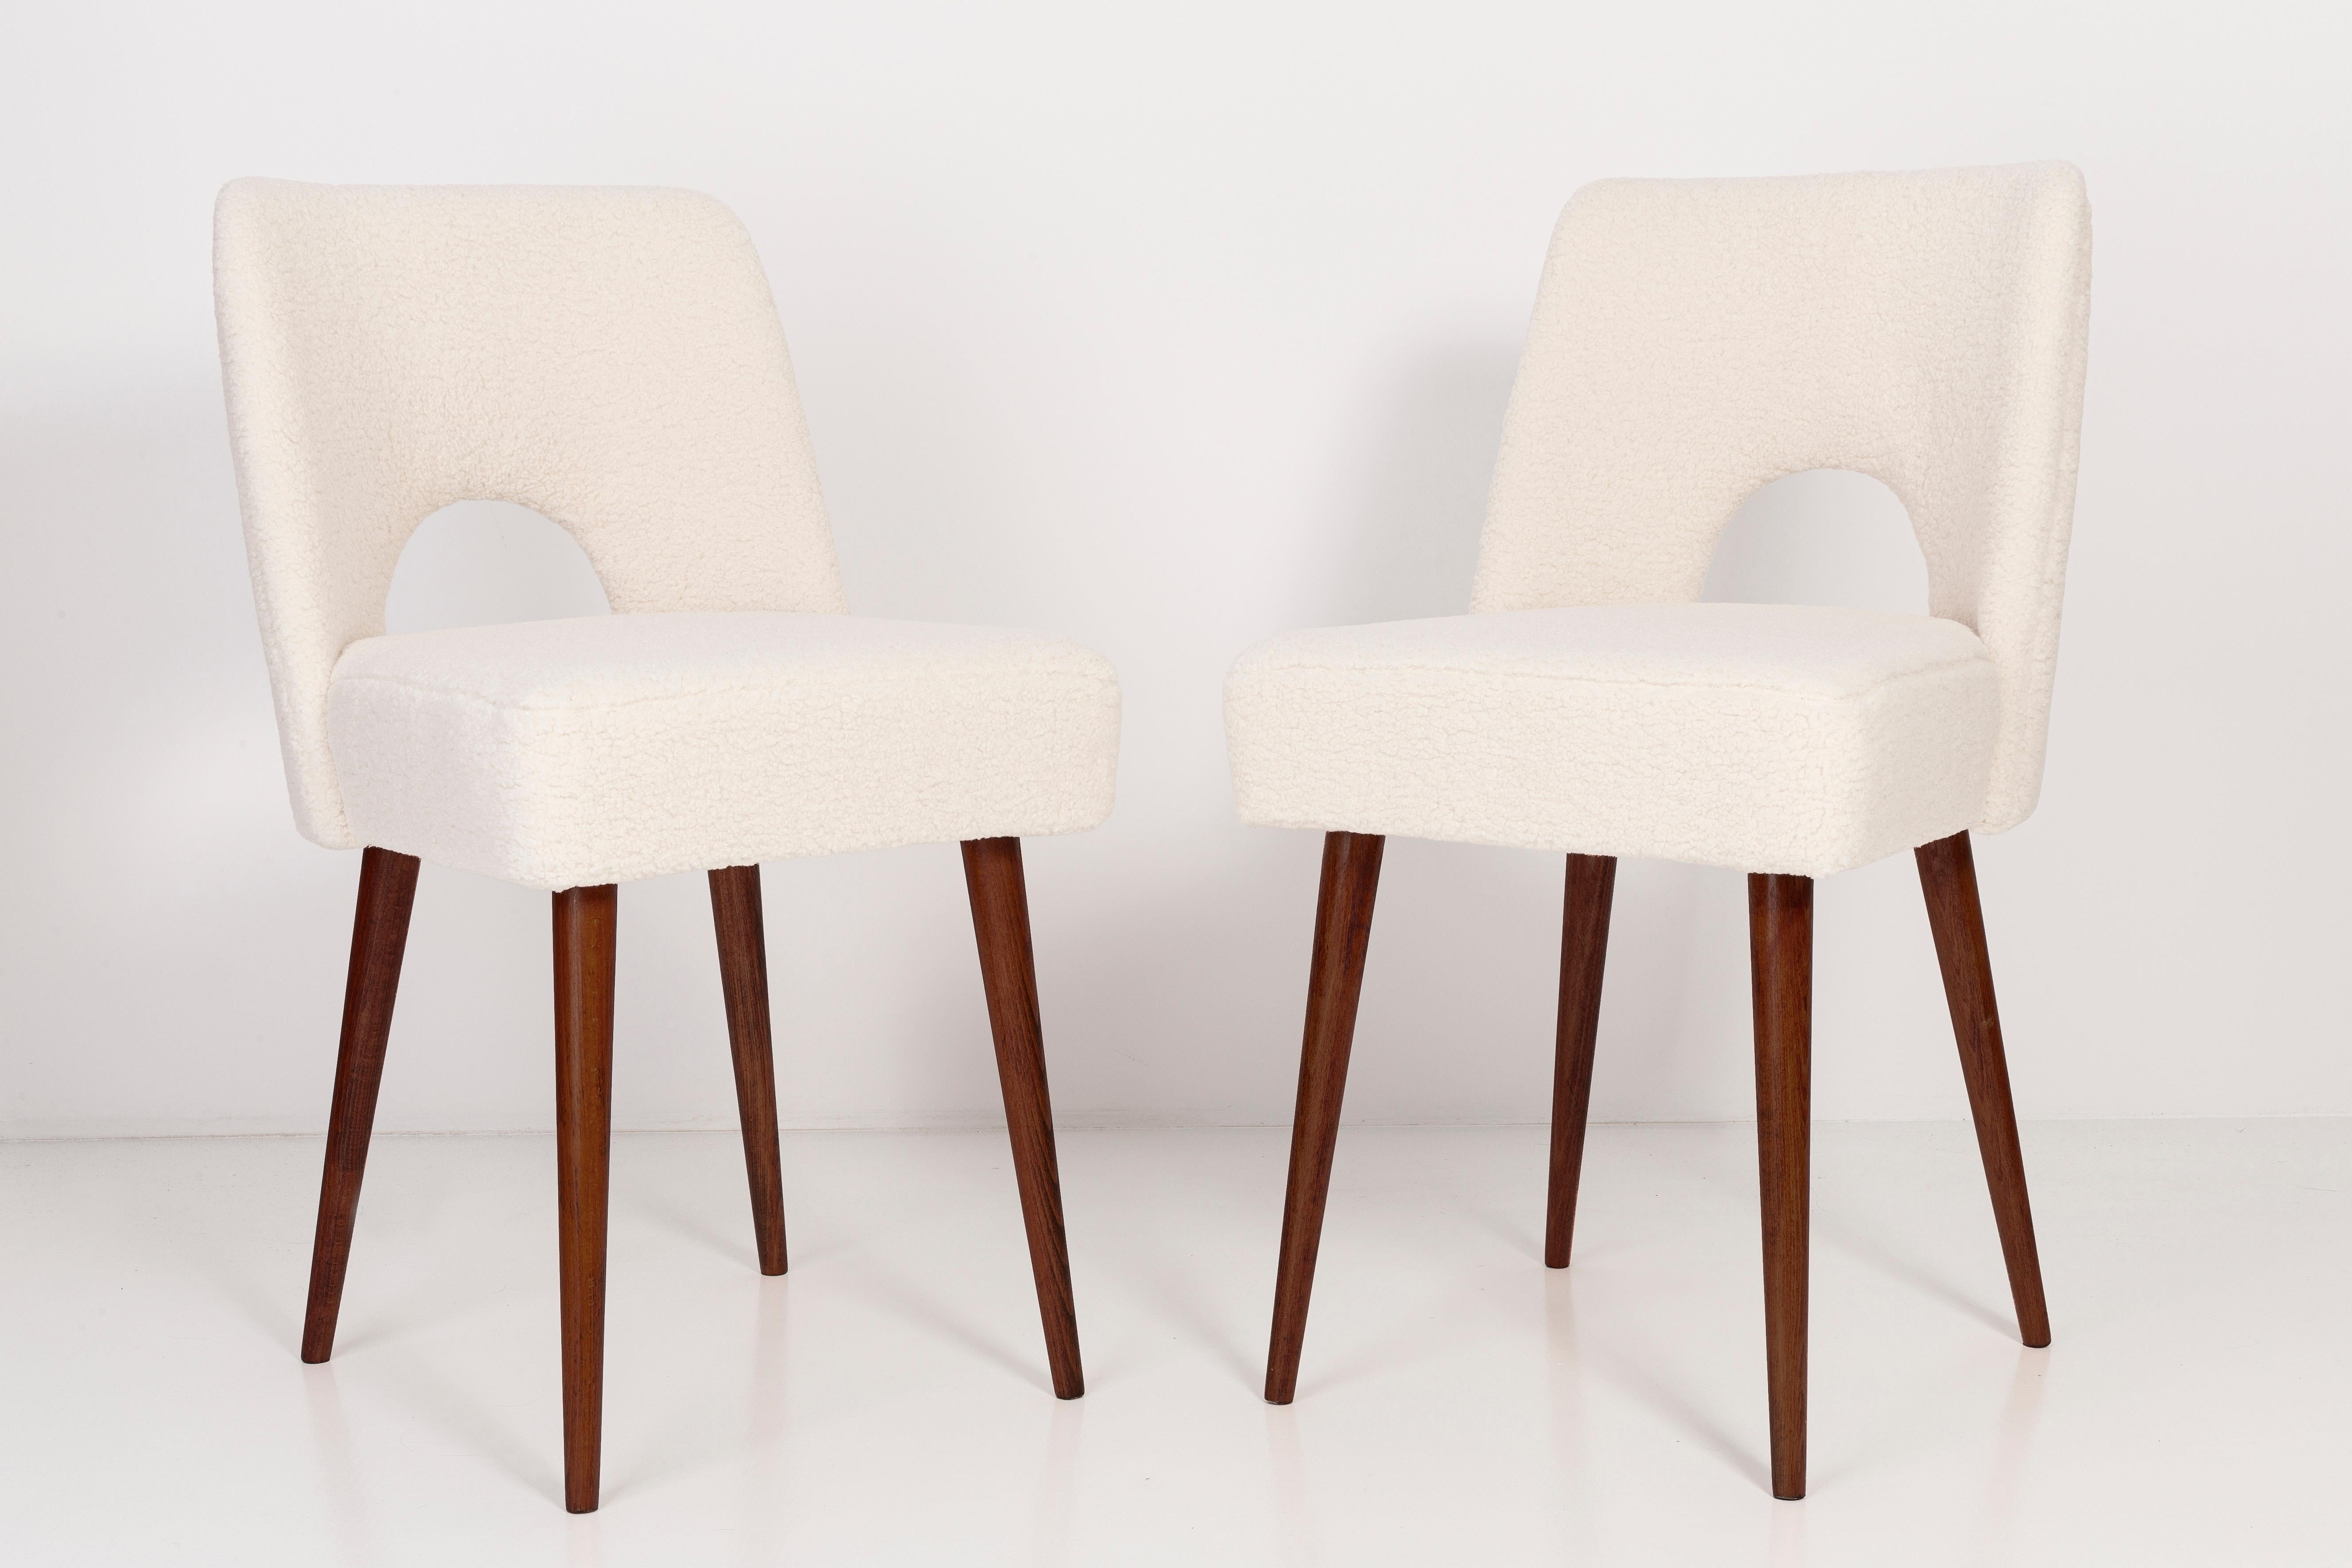 Two beautiful chairs type 1020 colloquially called 